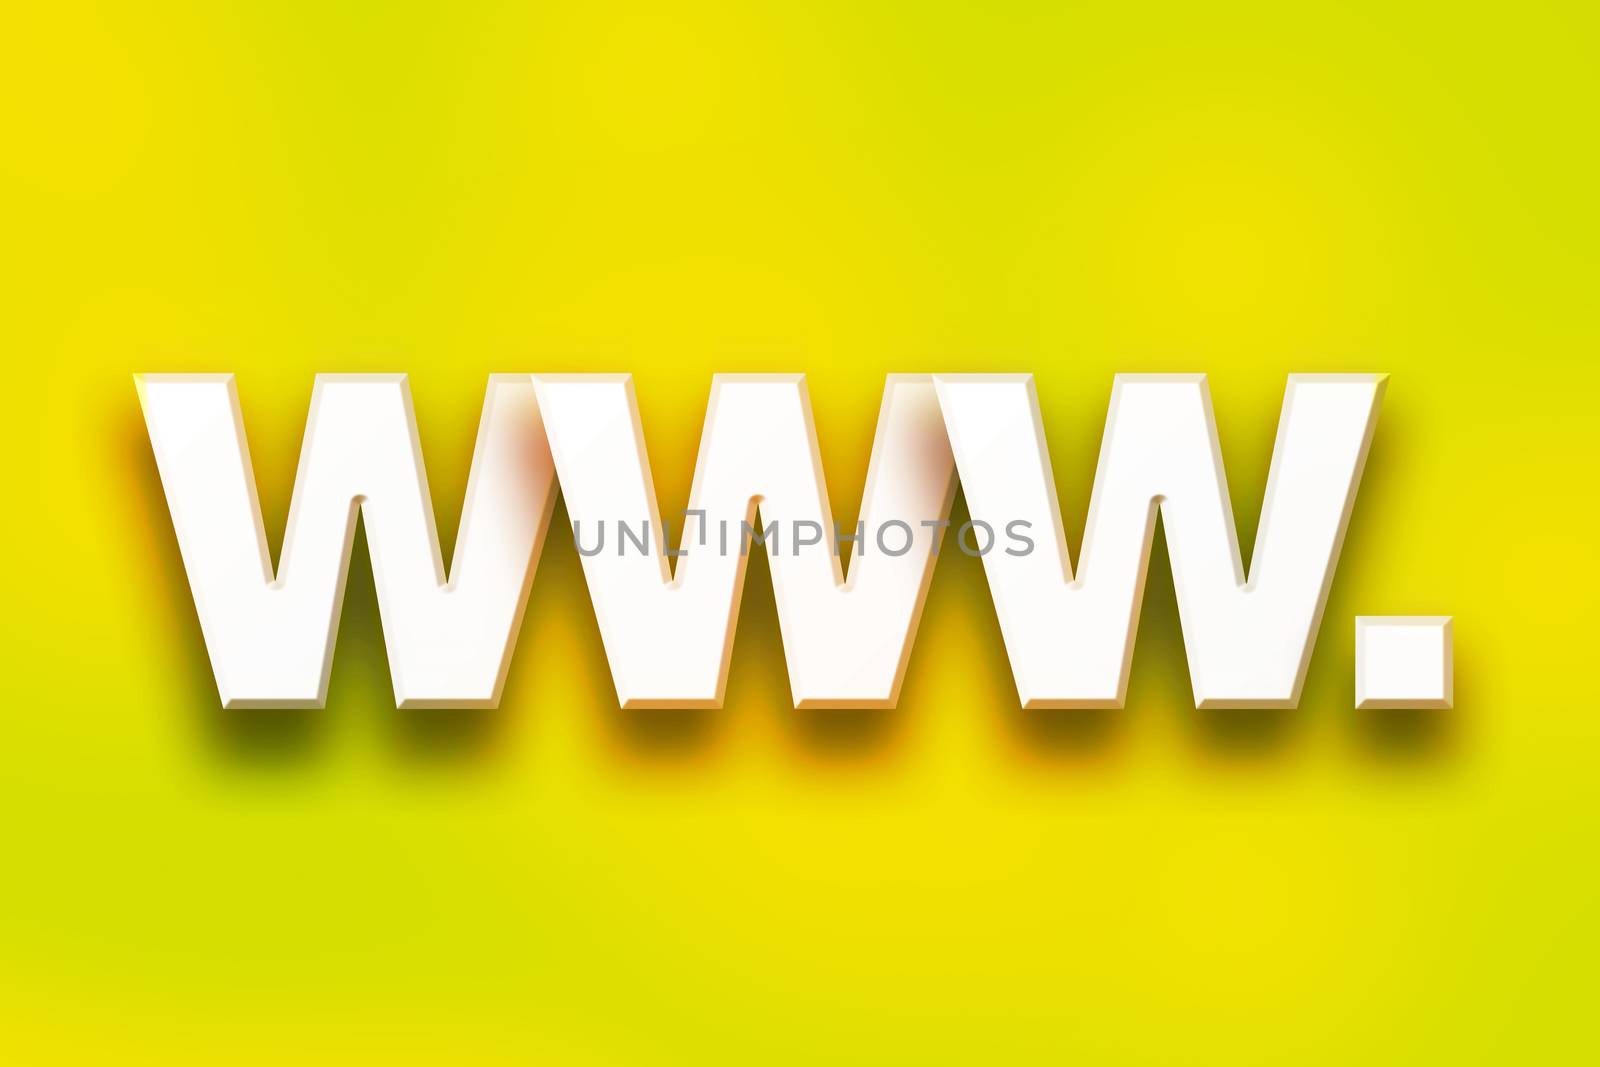 The word "www." written in white 3D letters on a colorful background concept and theme.